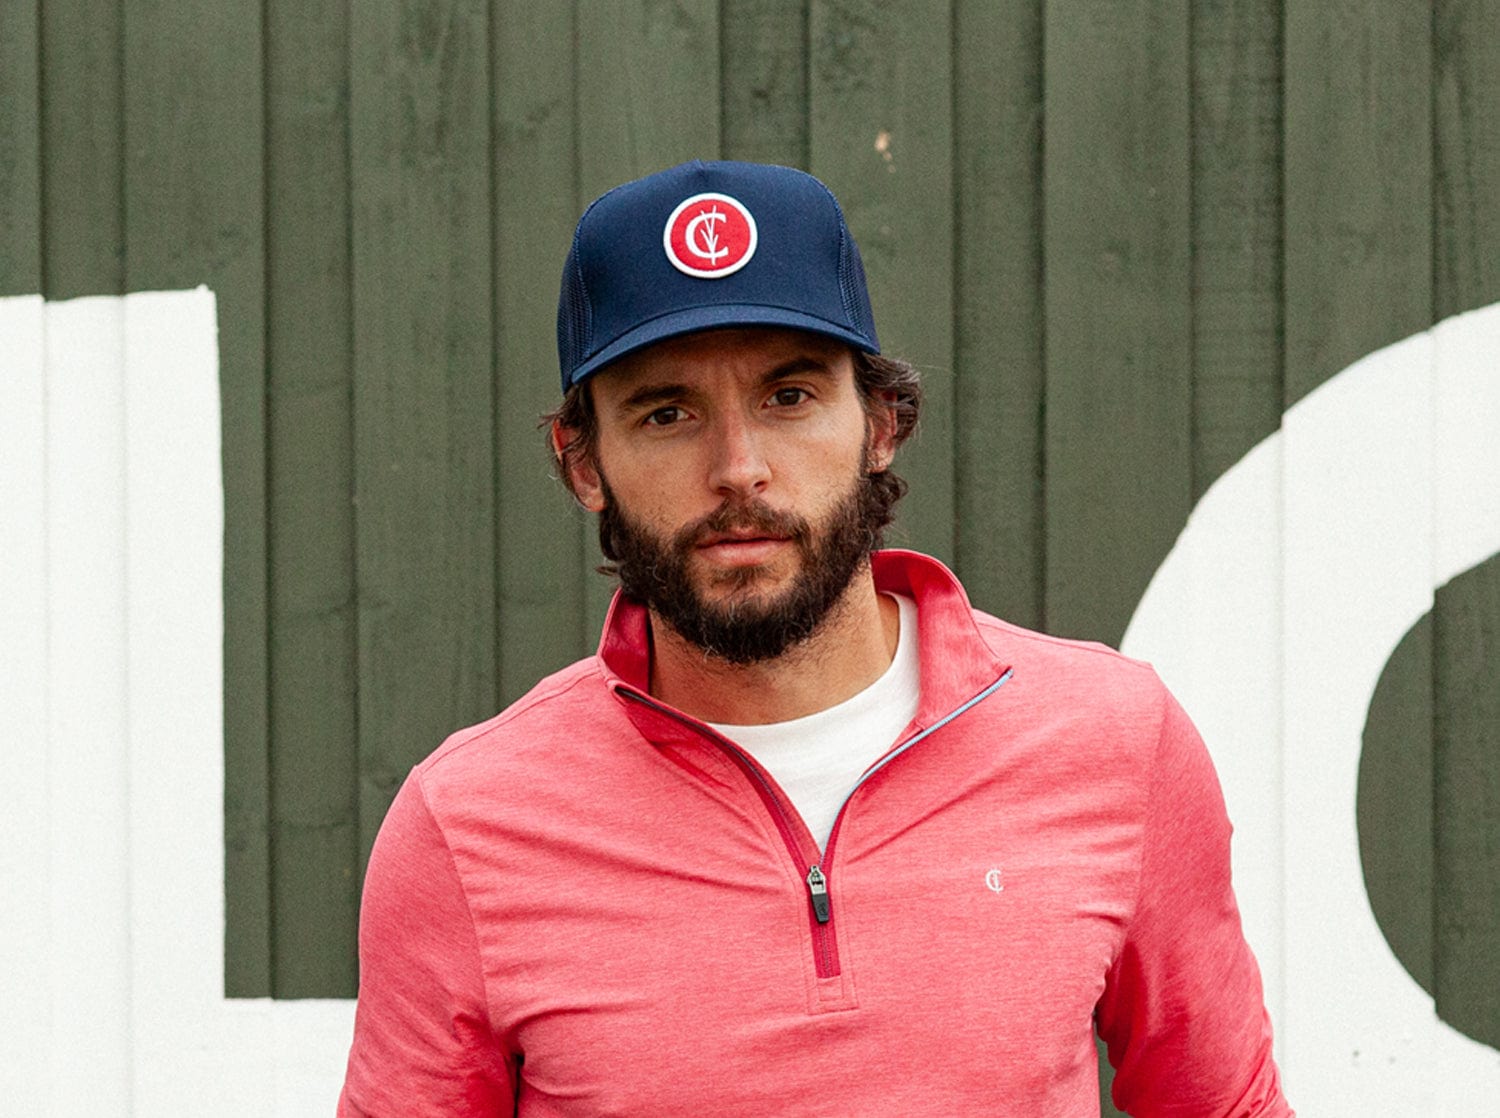 Classic Trucker Hat - Red Grassy C Patch - Navy - Secondary